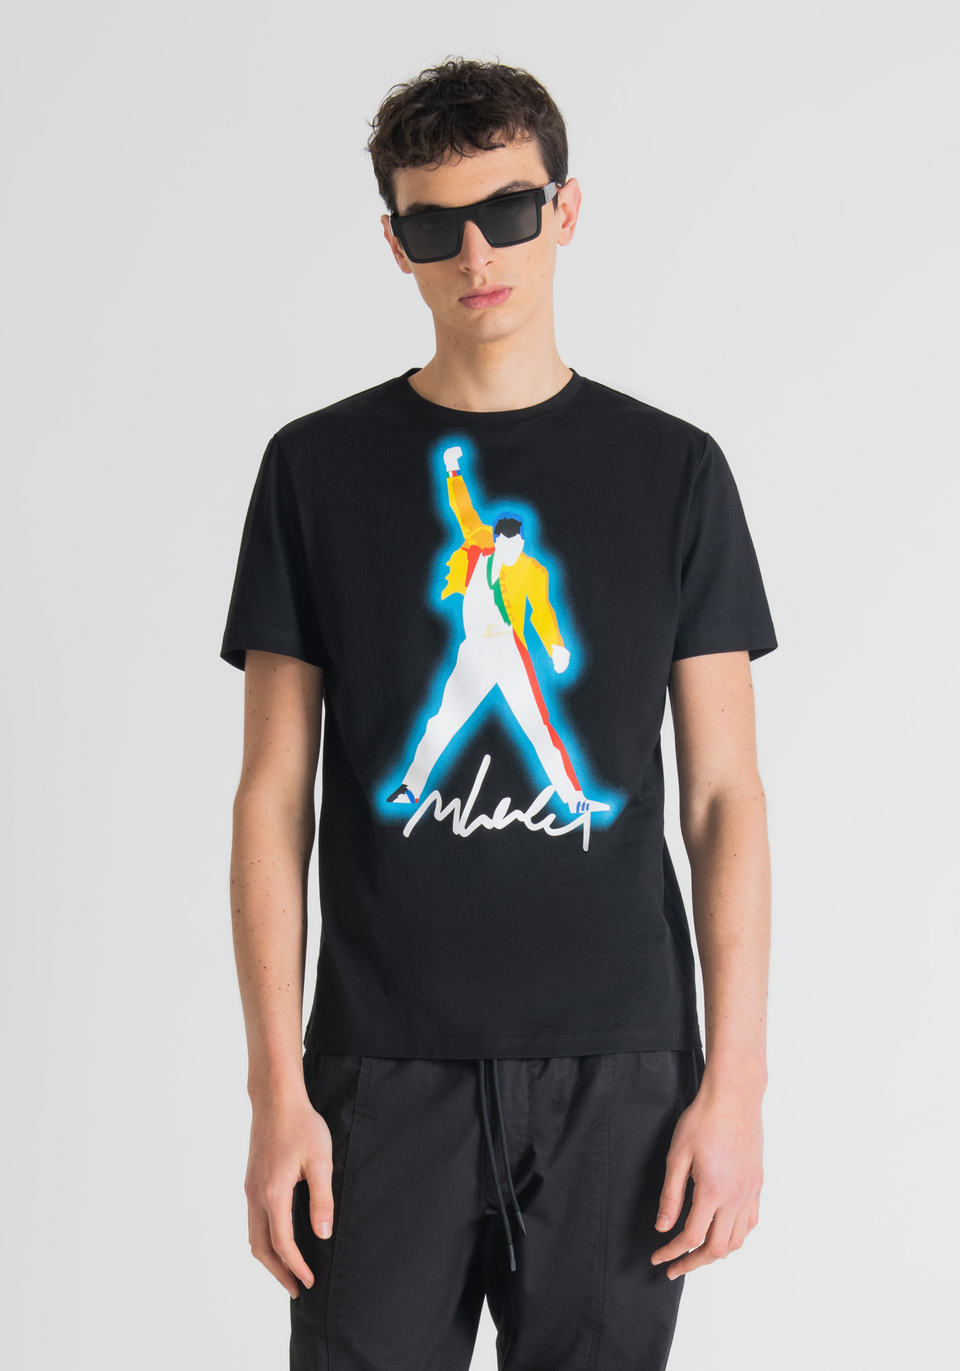 SLIM-FIT T-SHIRT IN PURE COTTON WITH FREDDIE MERCURY PRINT BY MARCO LODOLA - Antony Morato Online Shop